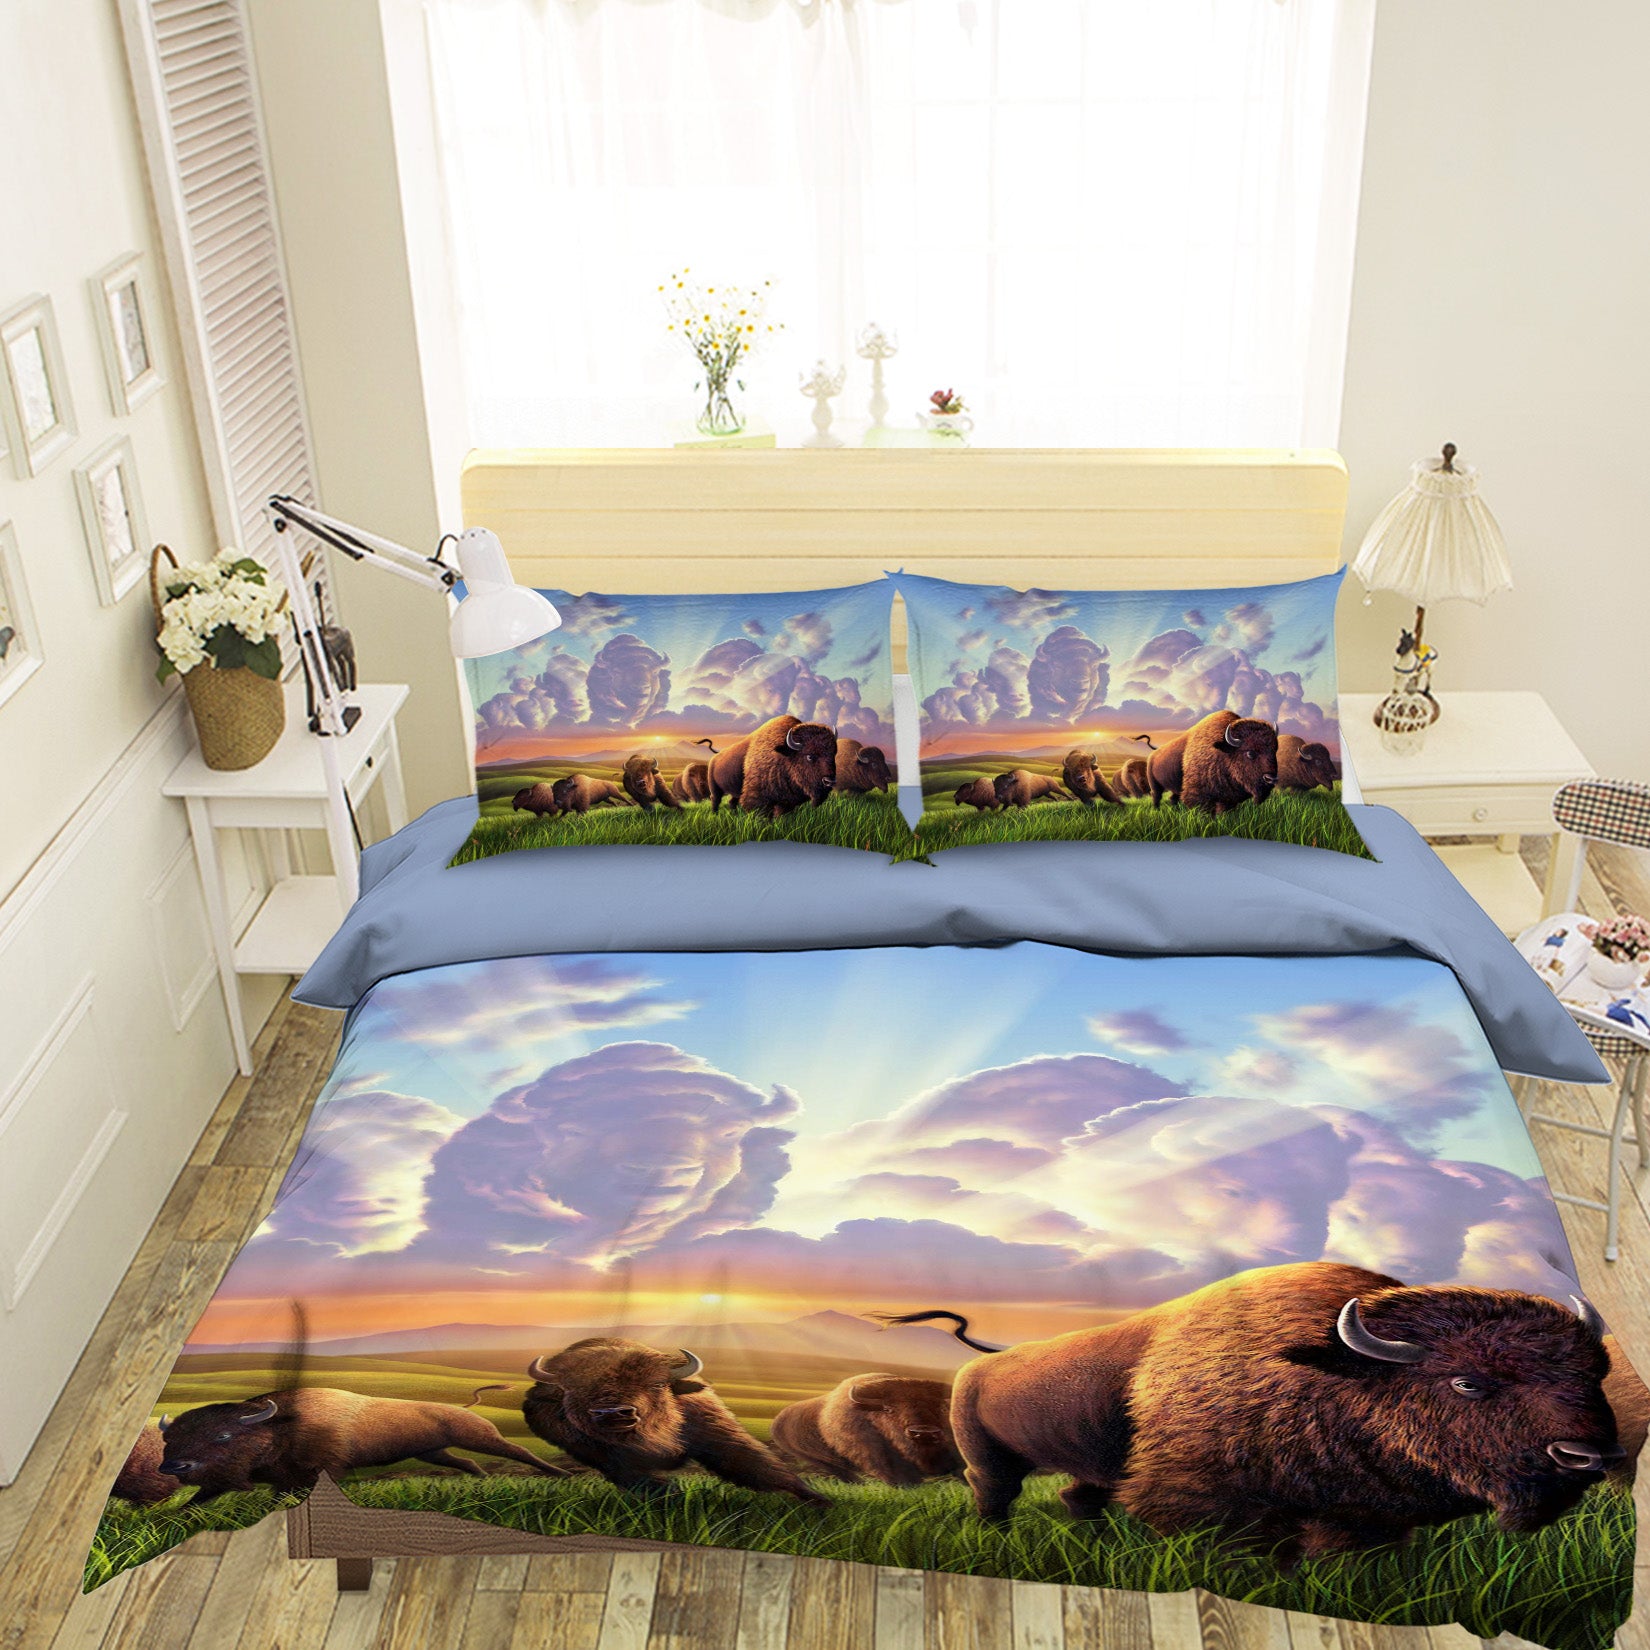 3D Stampede 2133 Jerry LoFaro bedding Bed Pillowcases Quilt